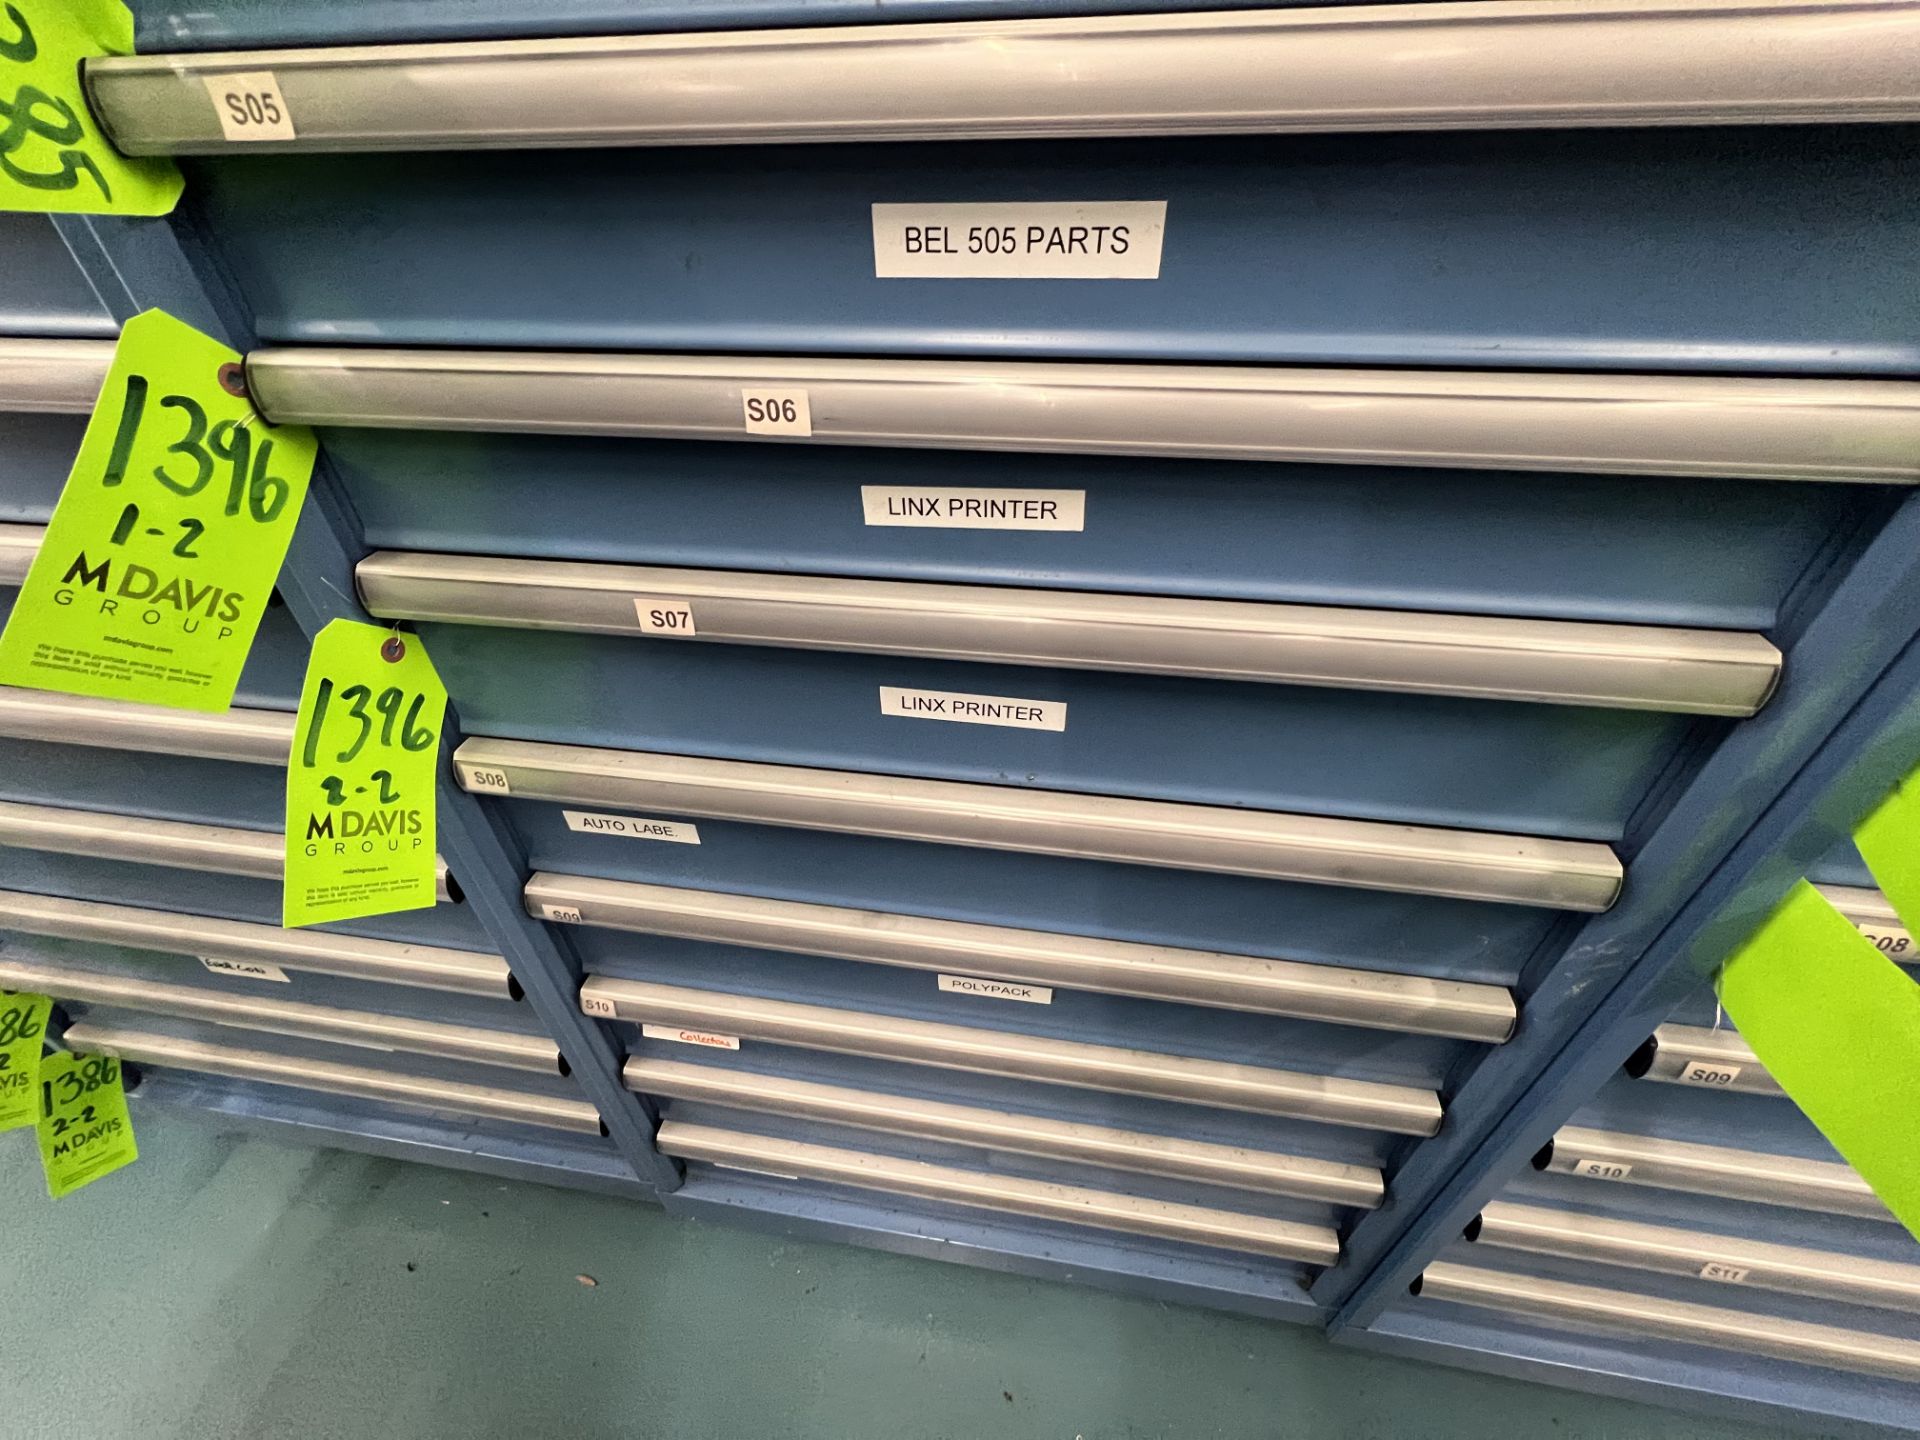 LINX DATE CODER PARTS, CONTENTS OF 2 SHELVES - Image 11 of 16